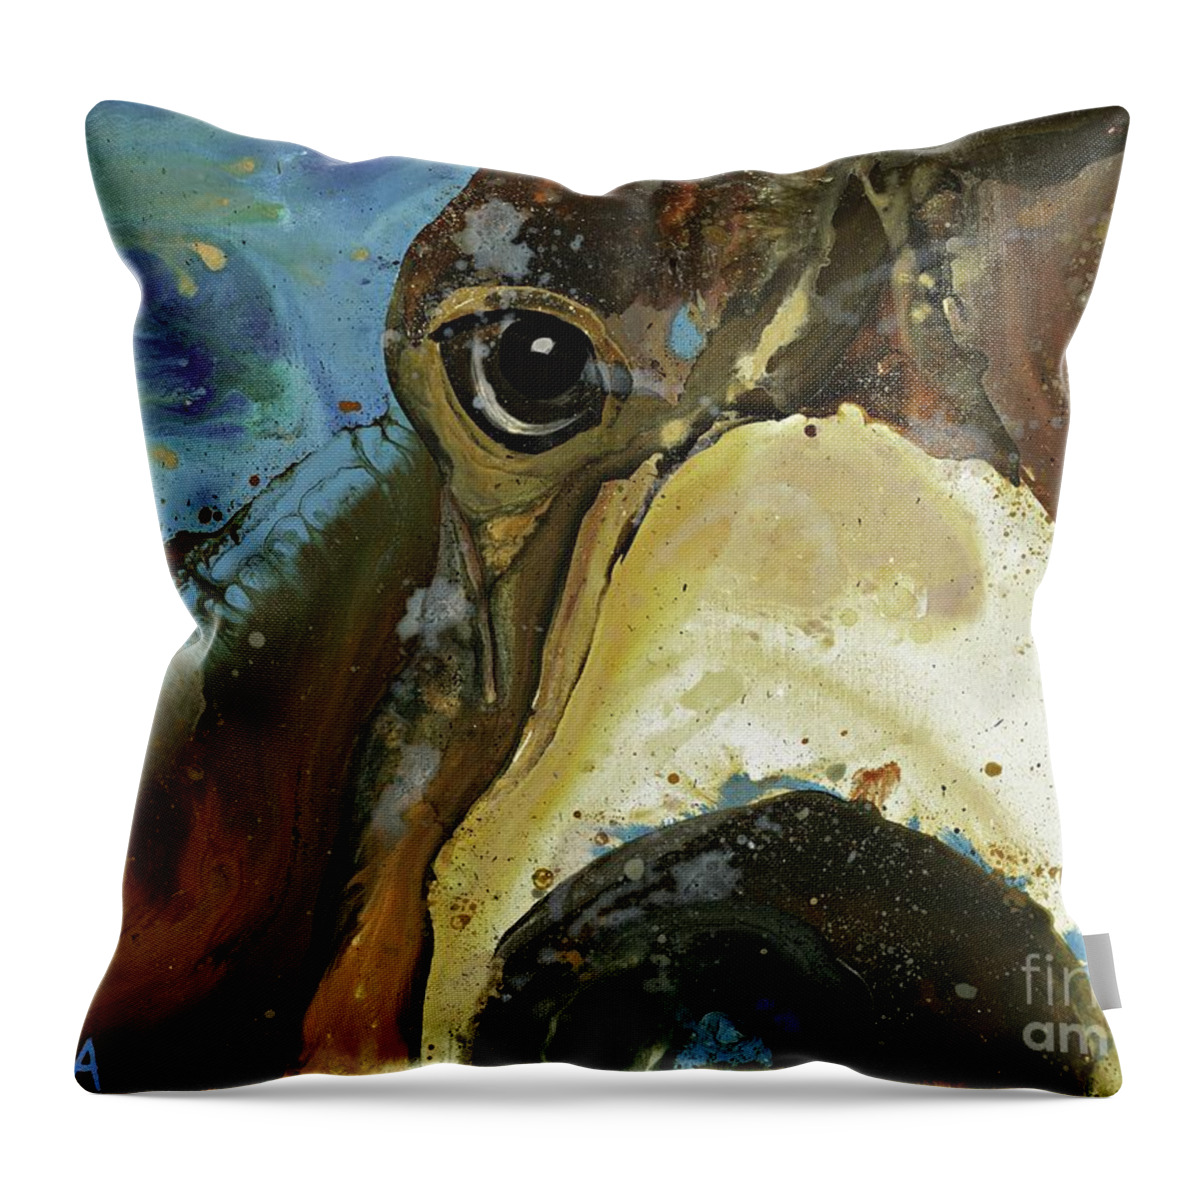 Dog Throw Pillow featuring the painting Gus by Kasha Ritter